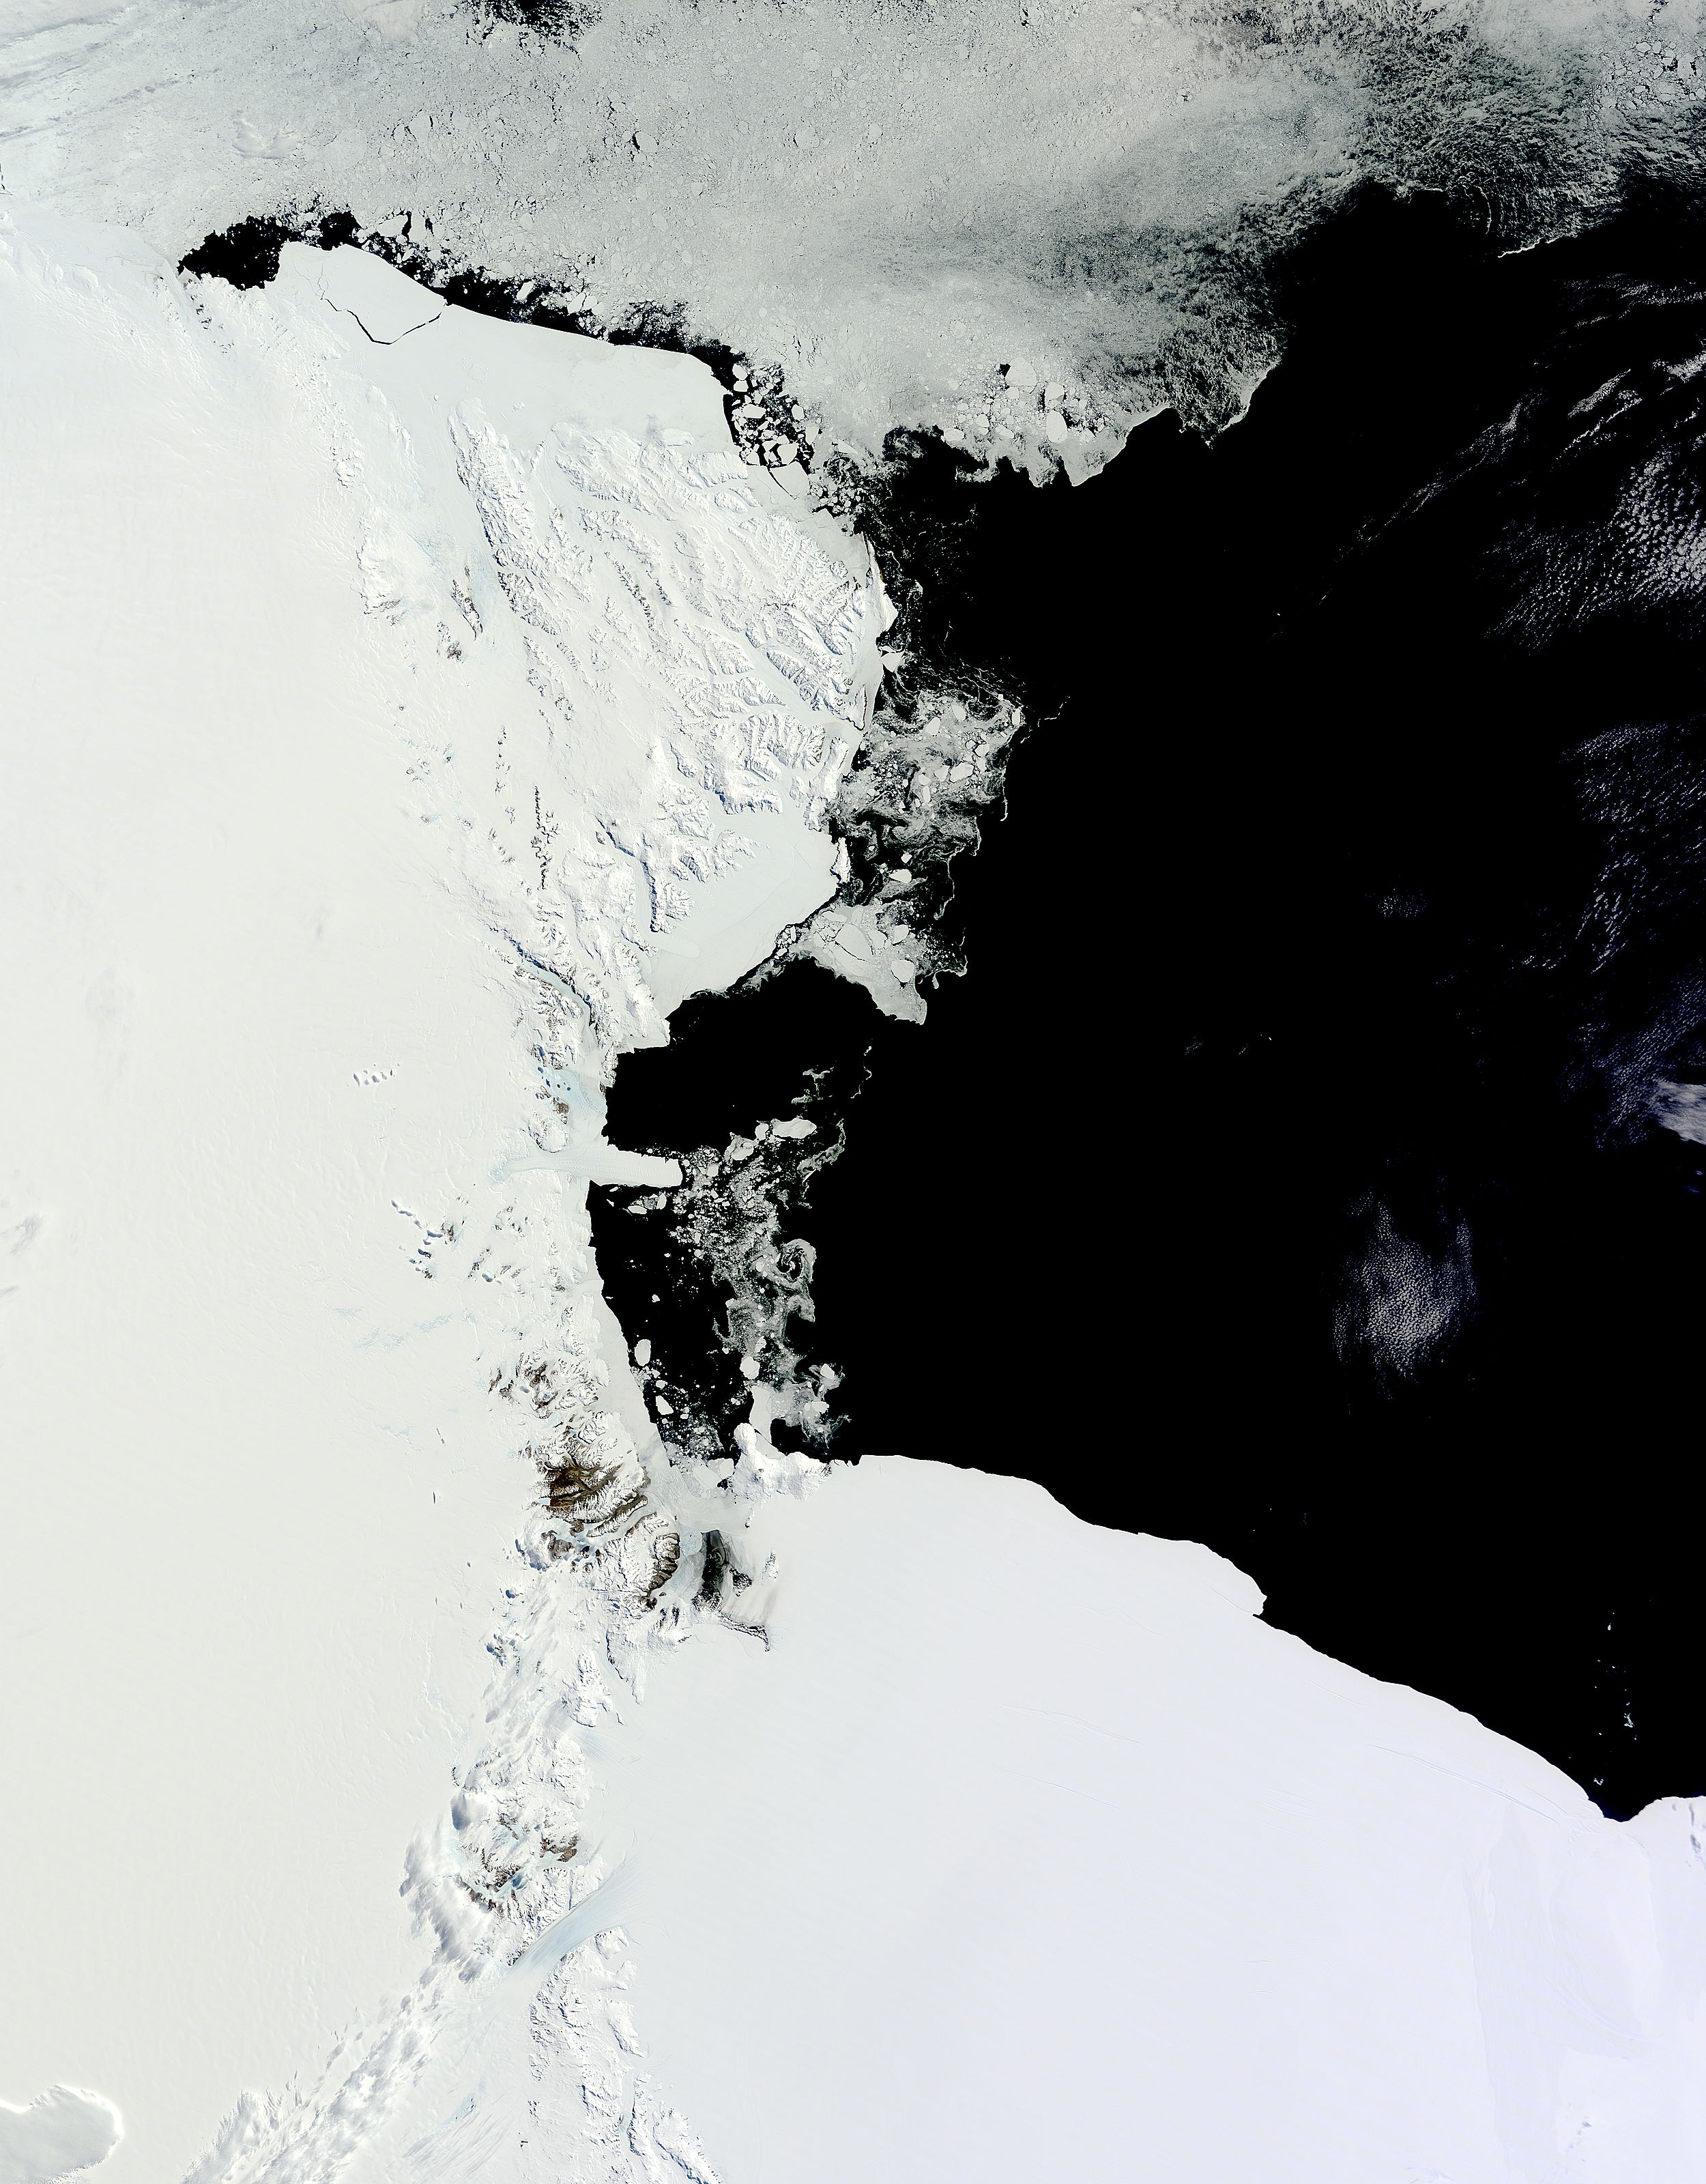 Western Ross Sea and Ice Shelf, Antarctica - related image preview